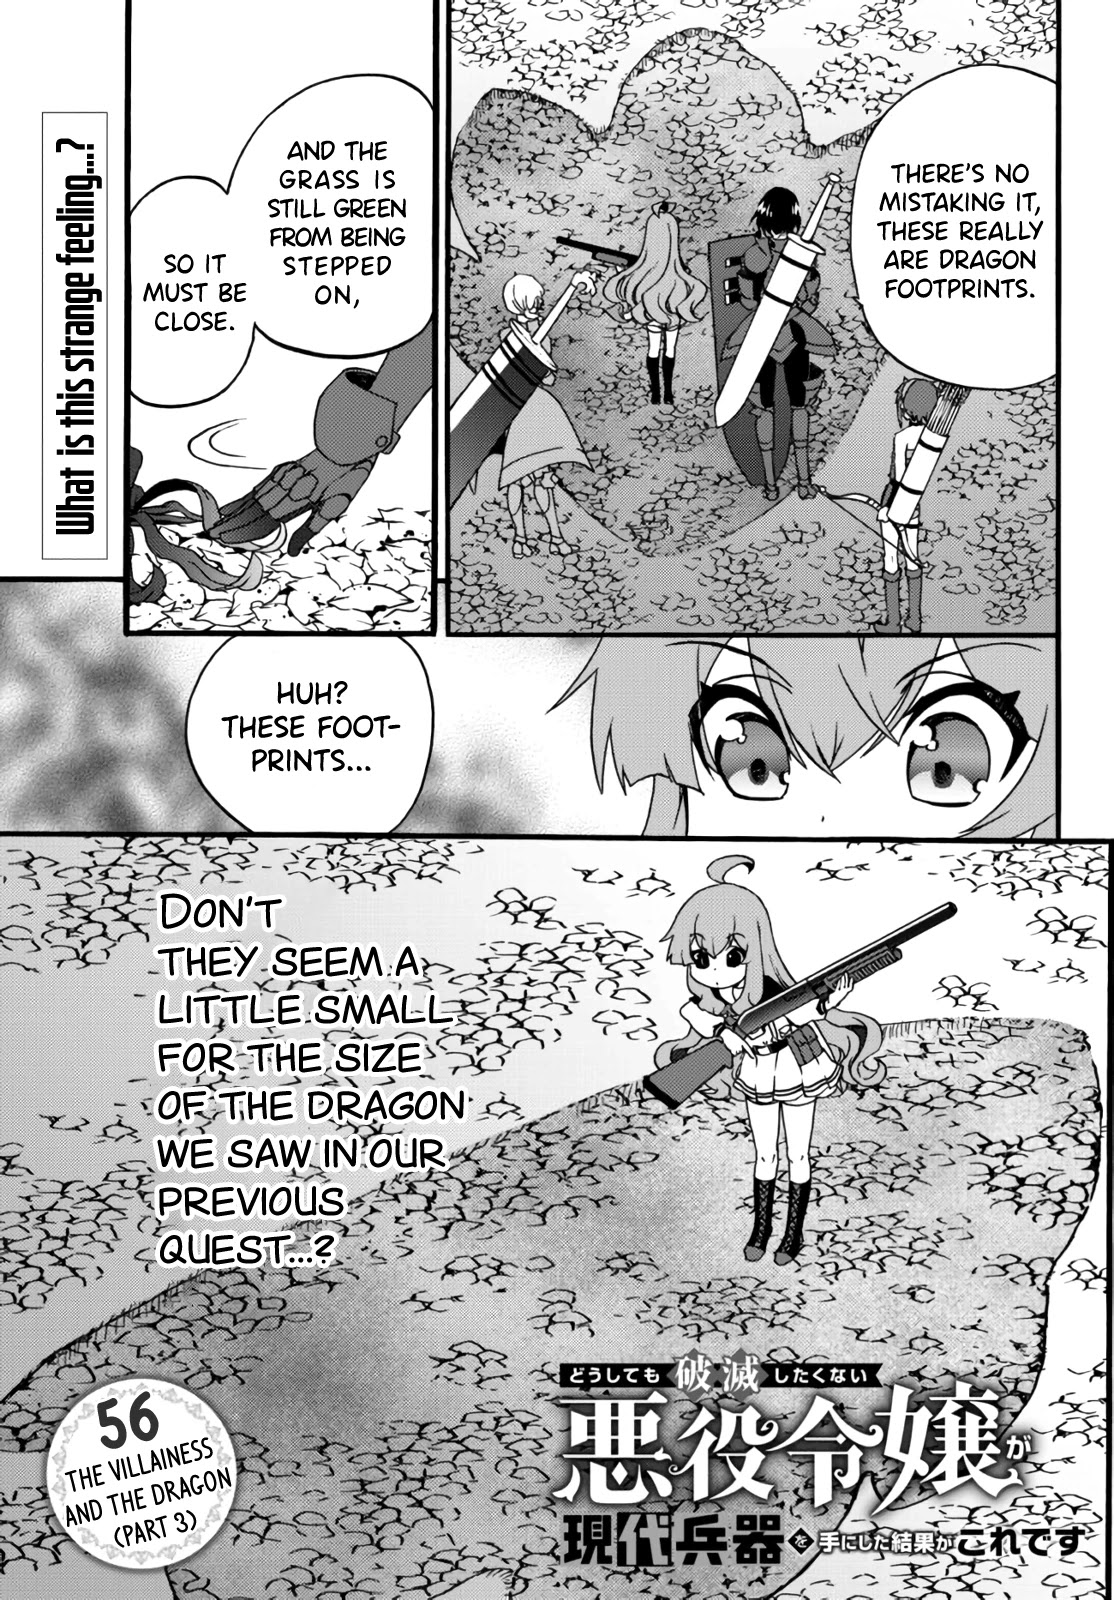 The Villainess Will Crush Her Destruction End Through Modern Firepower Chapter 56: The Villainess And The Dragon (Part 3) - Picture 1